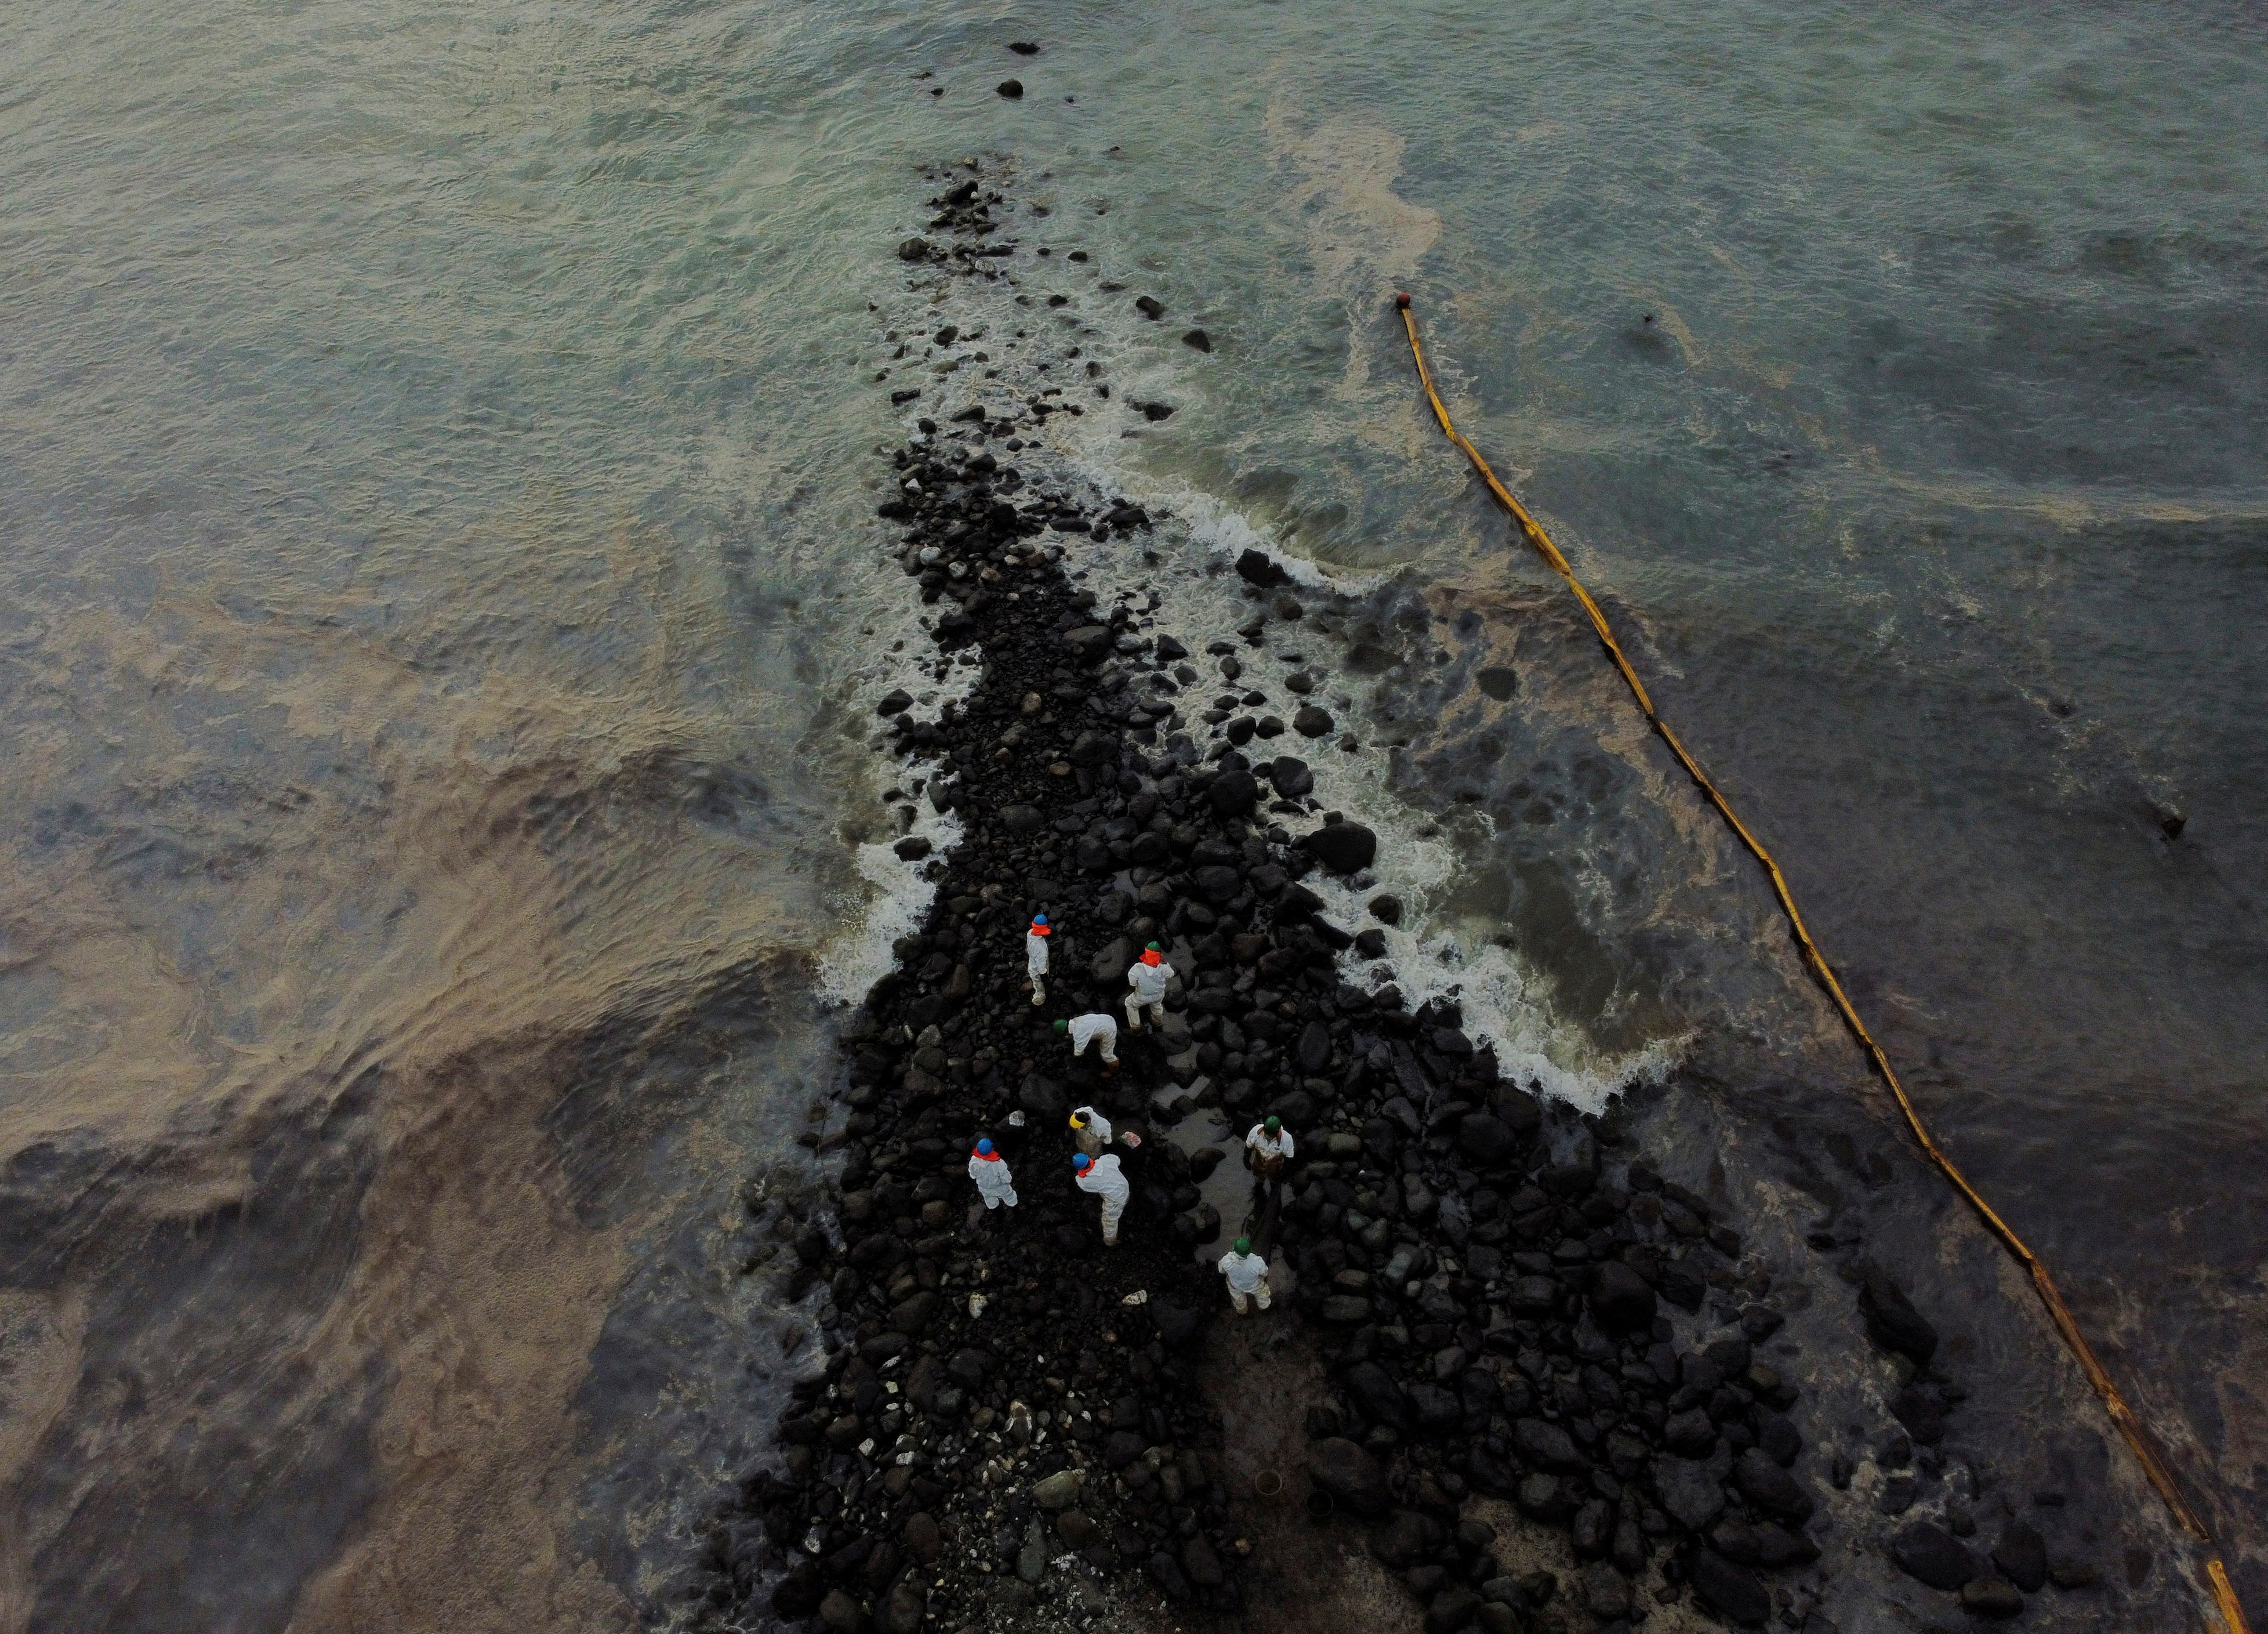 Workers clean the beach near Repsol's La Pampilla refinery after recent oil spill, in Ventanilla